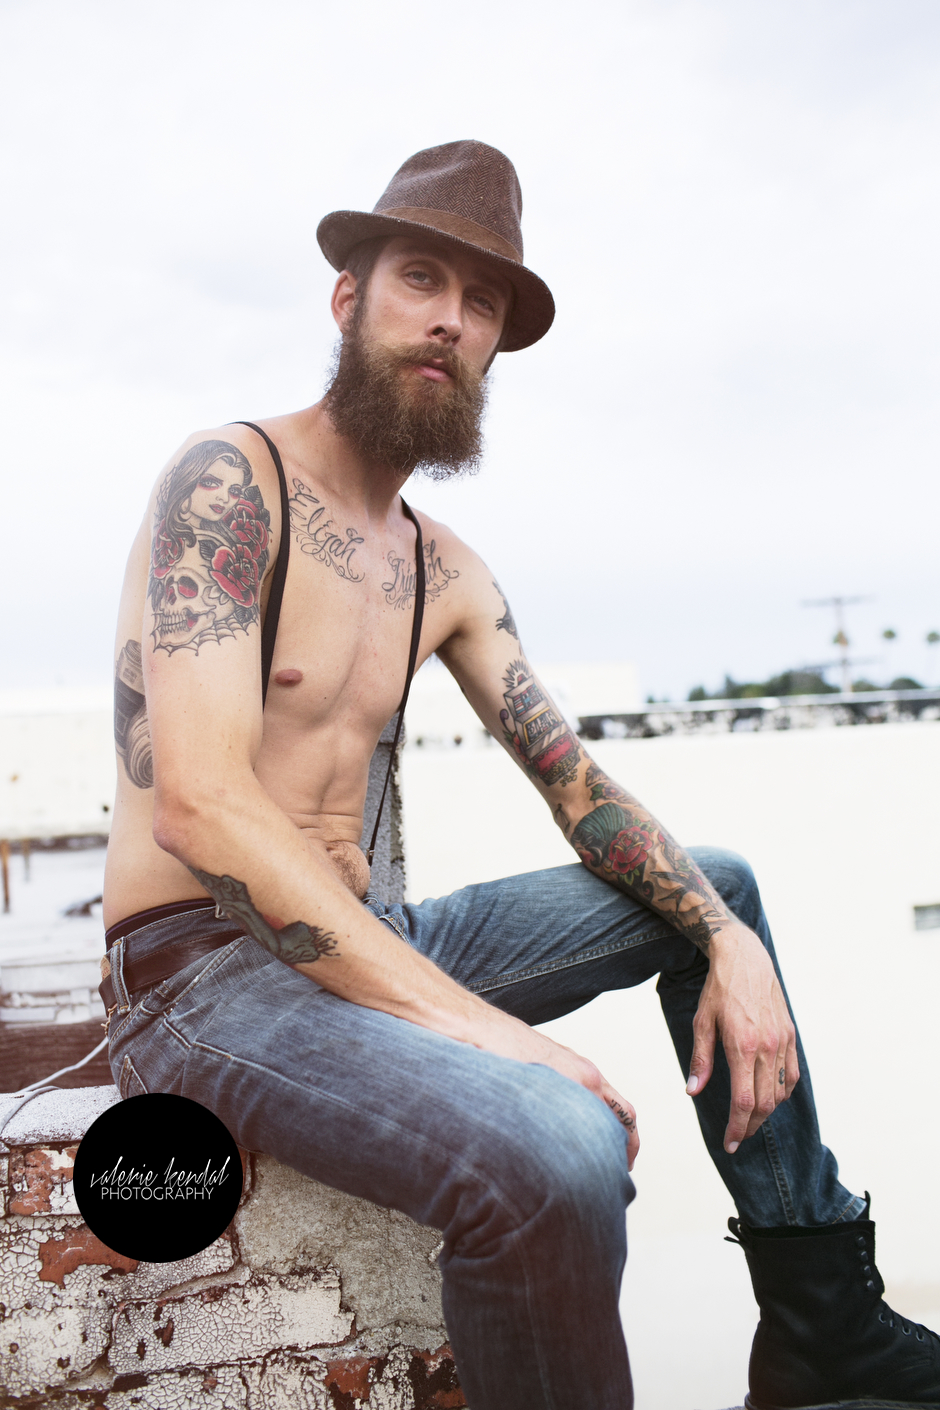 Los-Angeles-Tattoo-Suspenders-Commercial-Lifestyle-Rooftop-Valerie-Kendal-Photography -Mark B 866.JPG